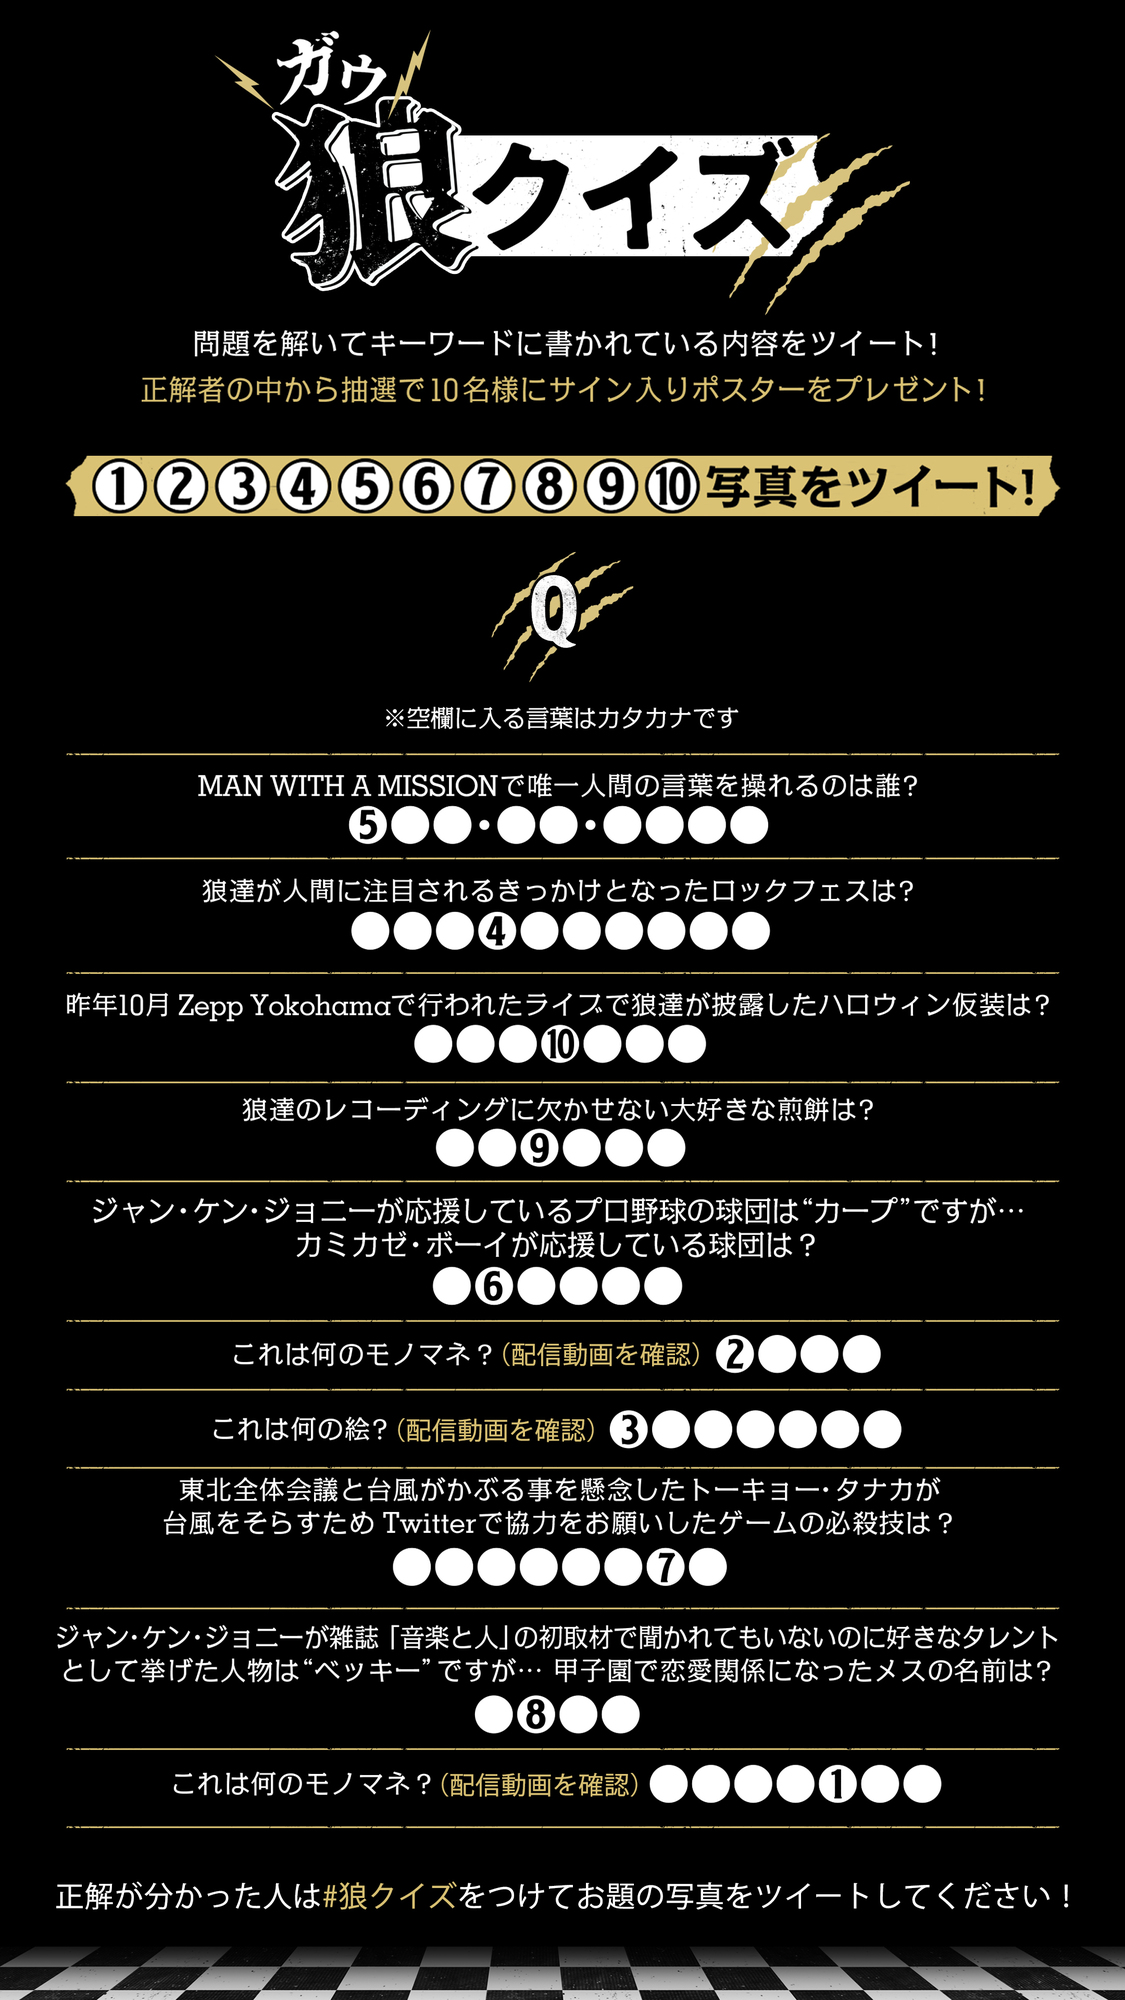 Break and Cross the Walls Ⅰ特別番組放送決定！！！   MAN WITH A